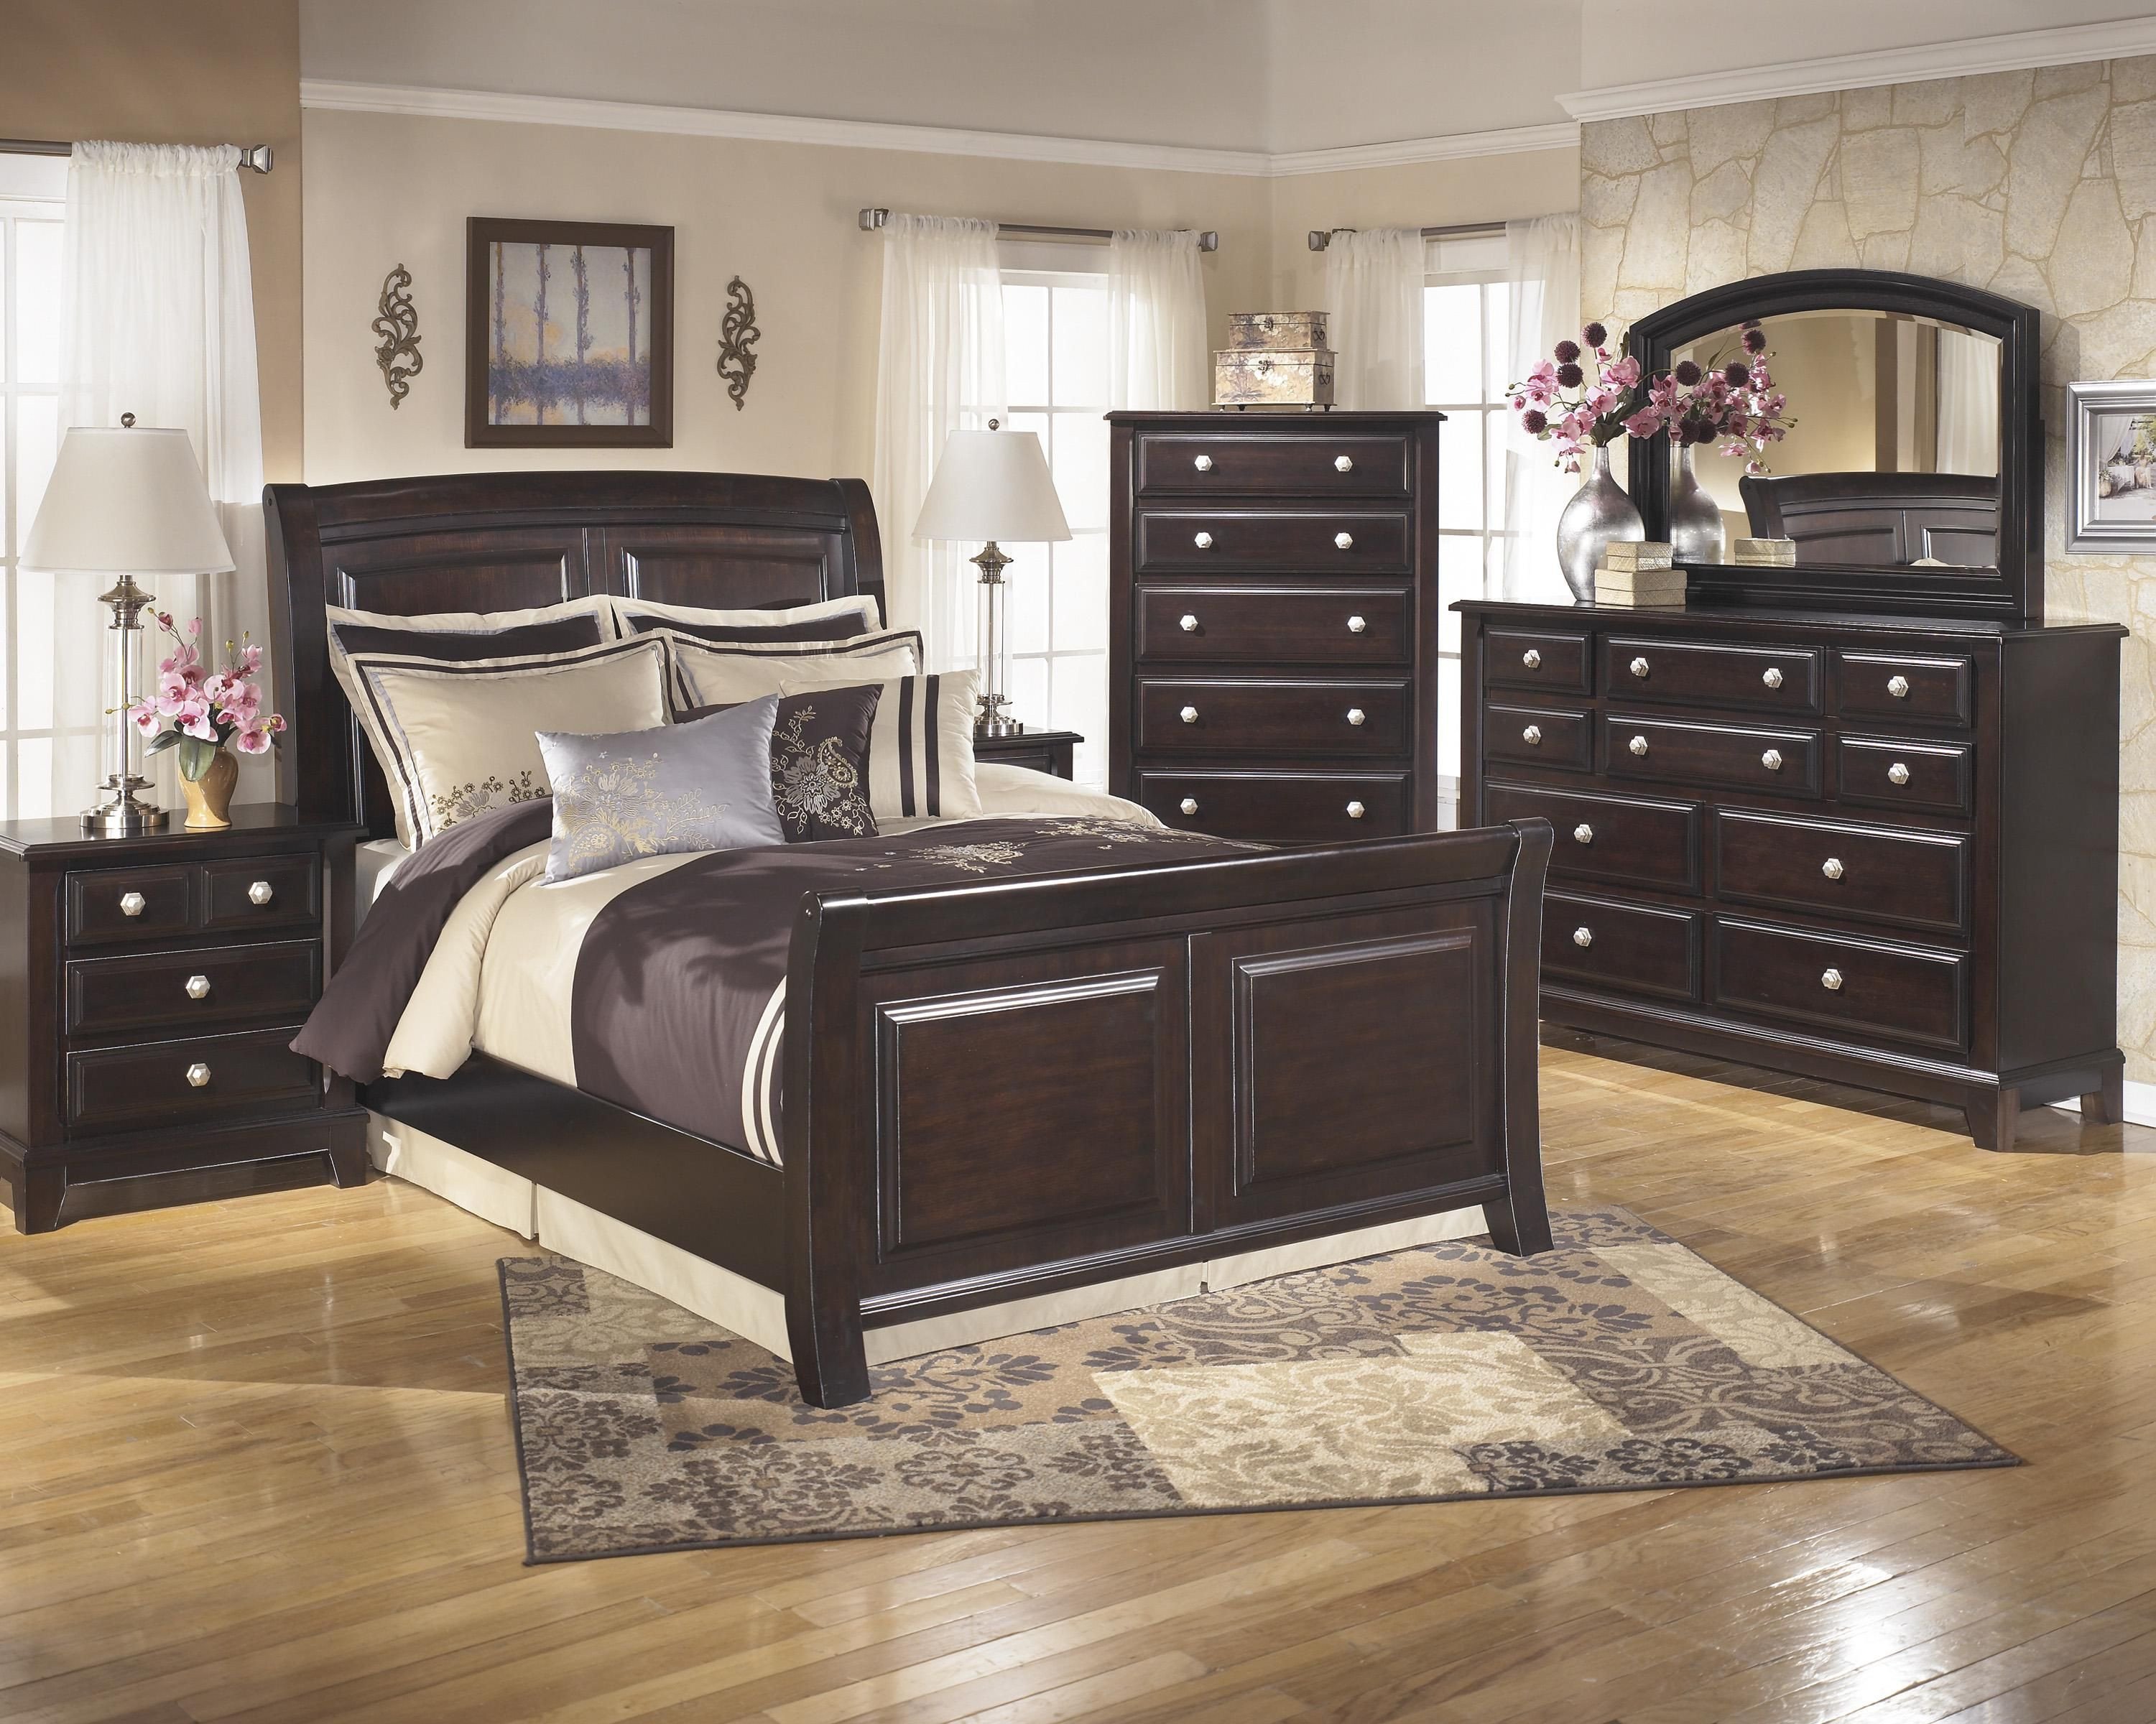 Ashley King Size Bedroom Set Unique Ridgley King Bedroom Group by Signature Design by ashley